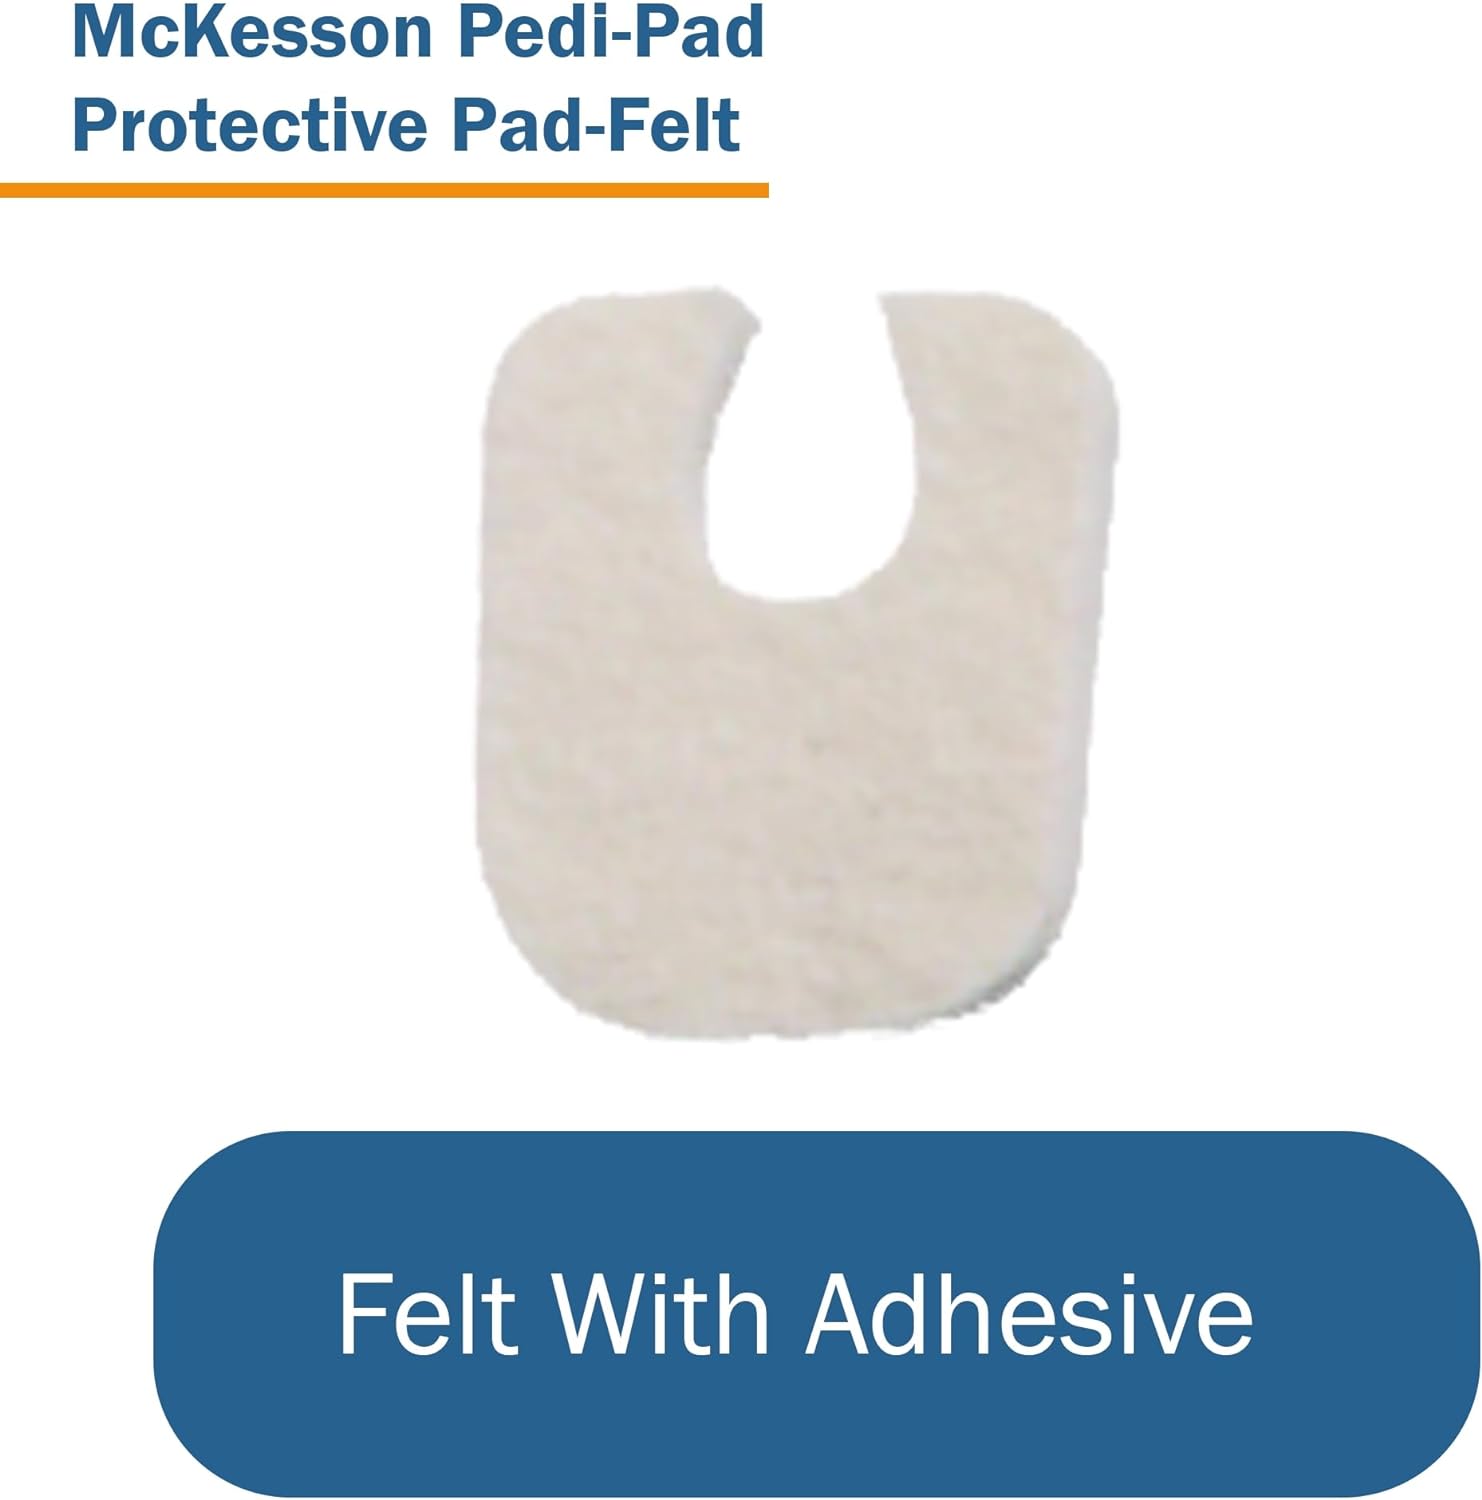 McKesson Protective Foot Pads - Felt, Adhesive, White - Size 105, 1/8 in, 100 Count